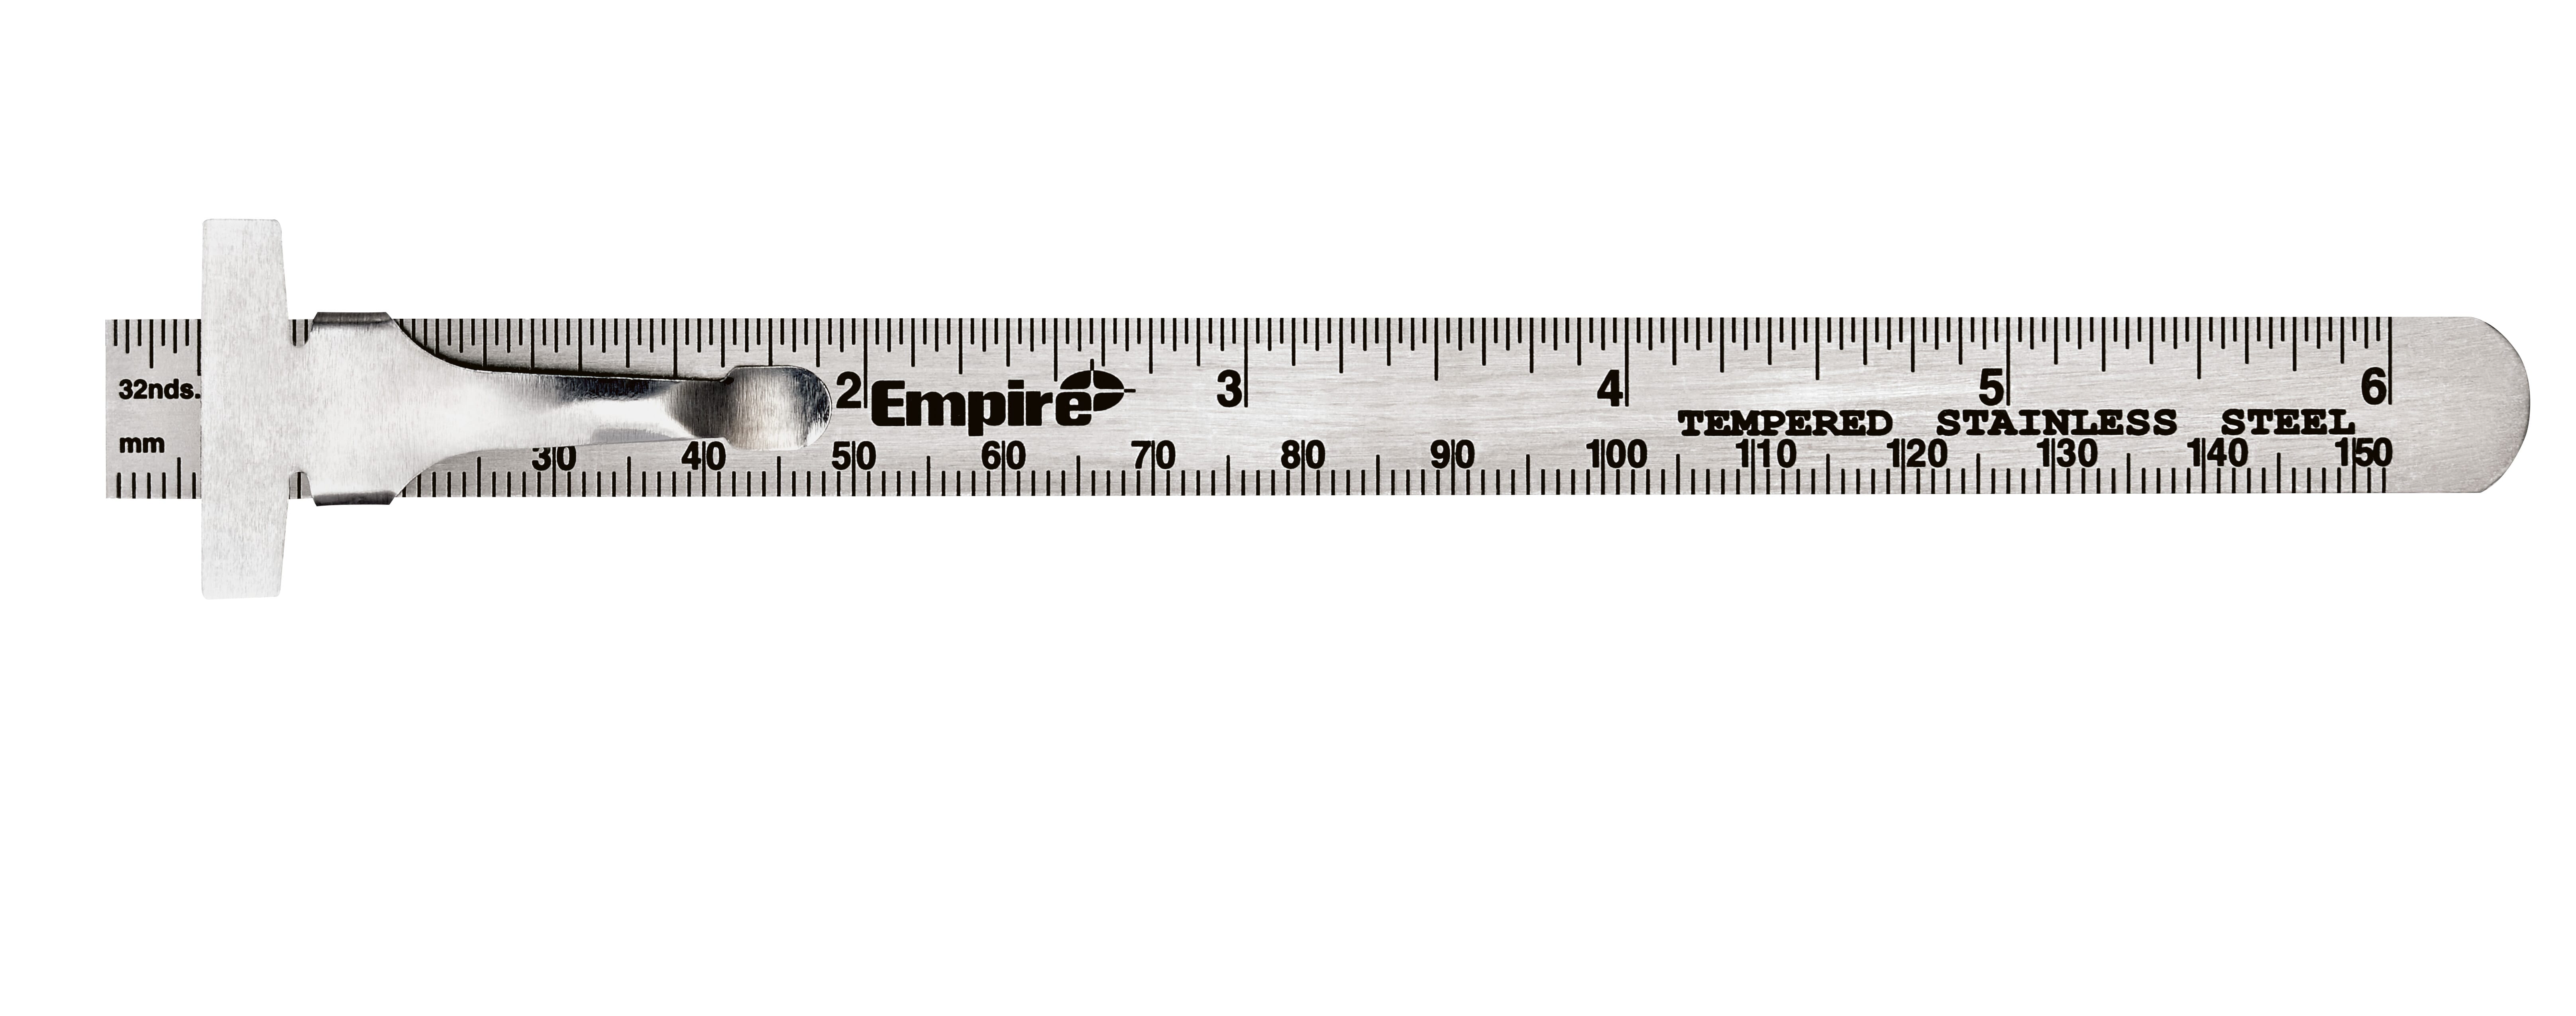 Milwaukee® Empire® 2730 Pocket Ruler, Graduations 1/32 in, 6-1/2 in L, Stainless Steel